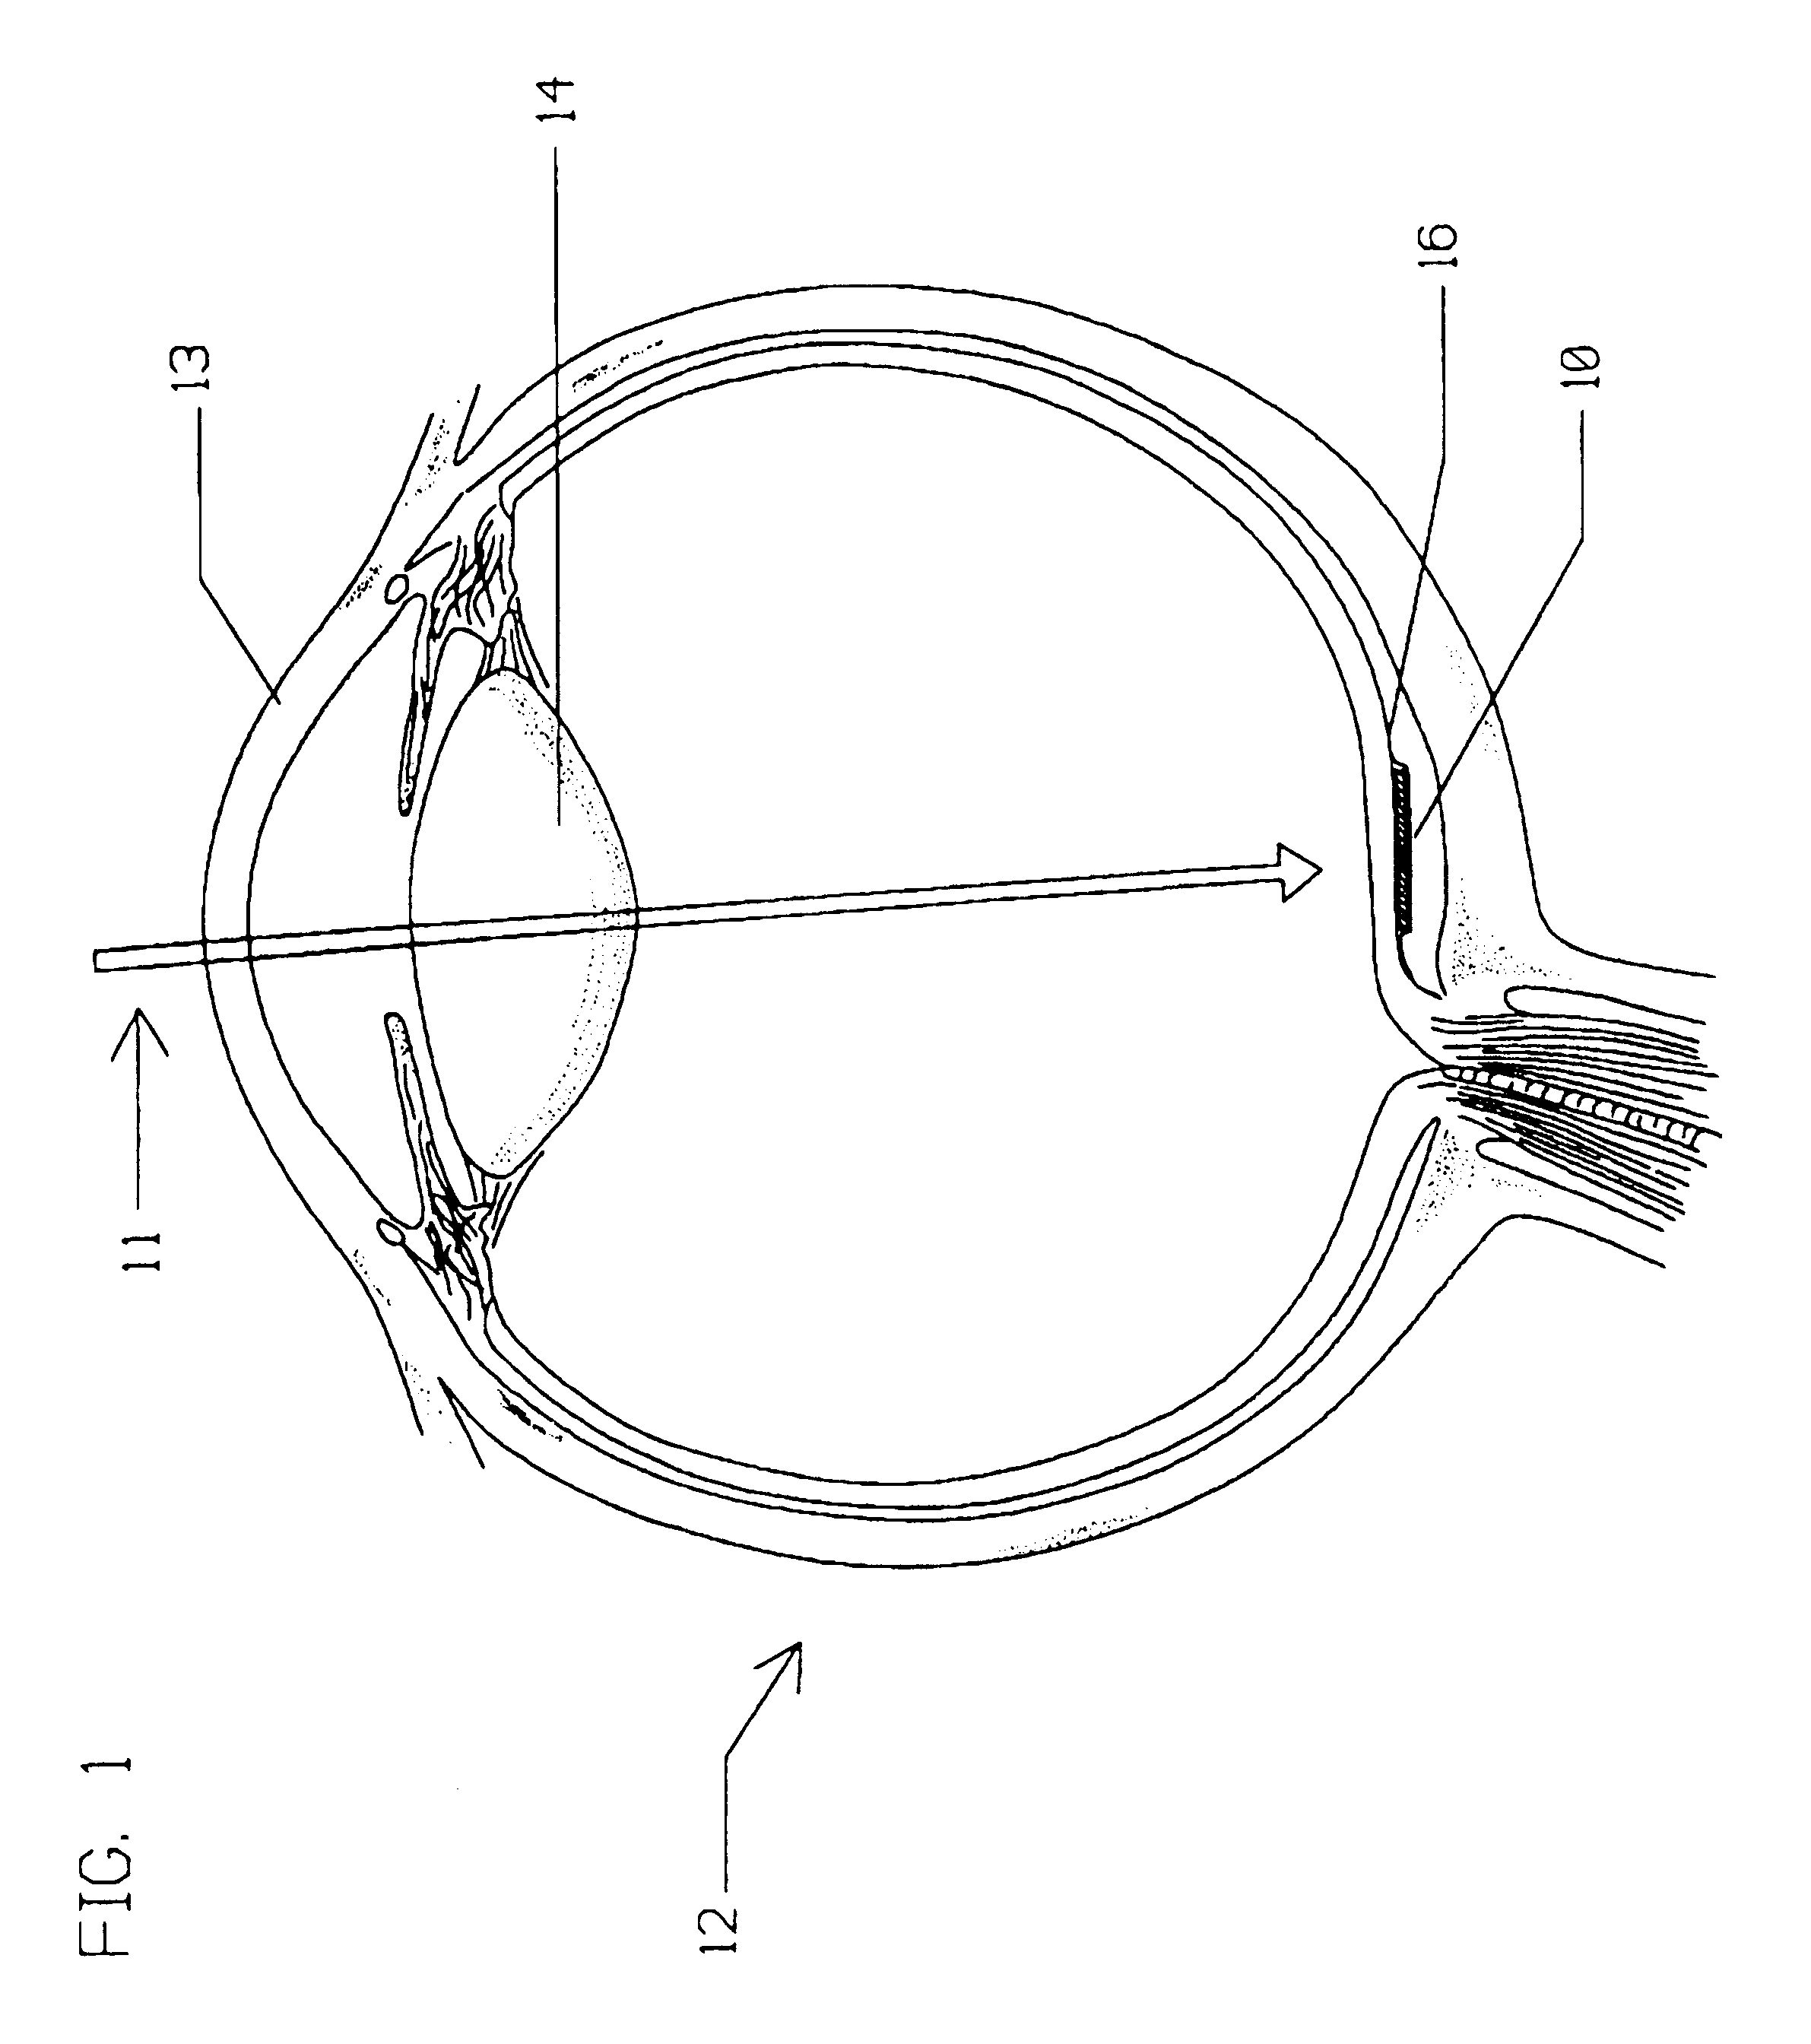 Multi-phasic microphotodetector retinal implant with variable voltage and current capability